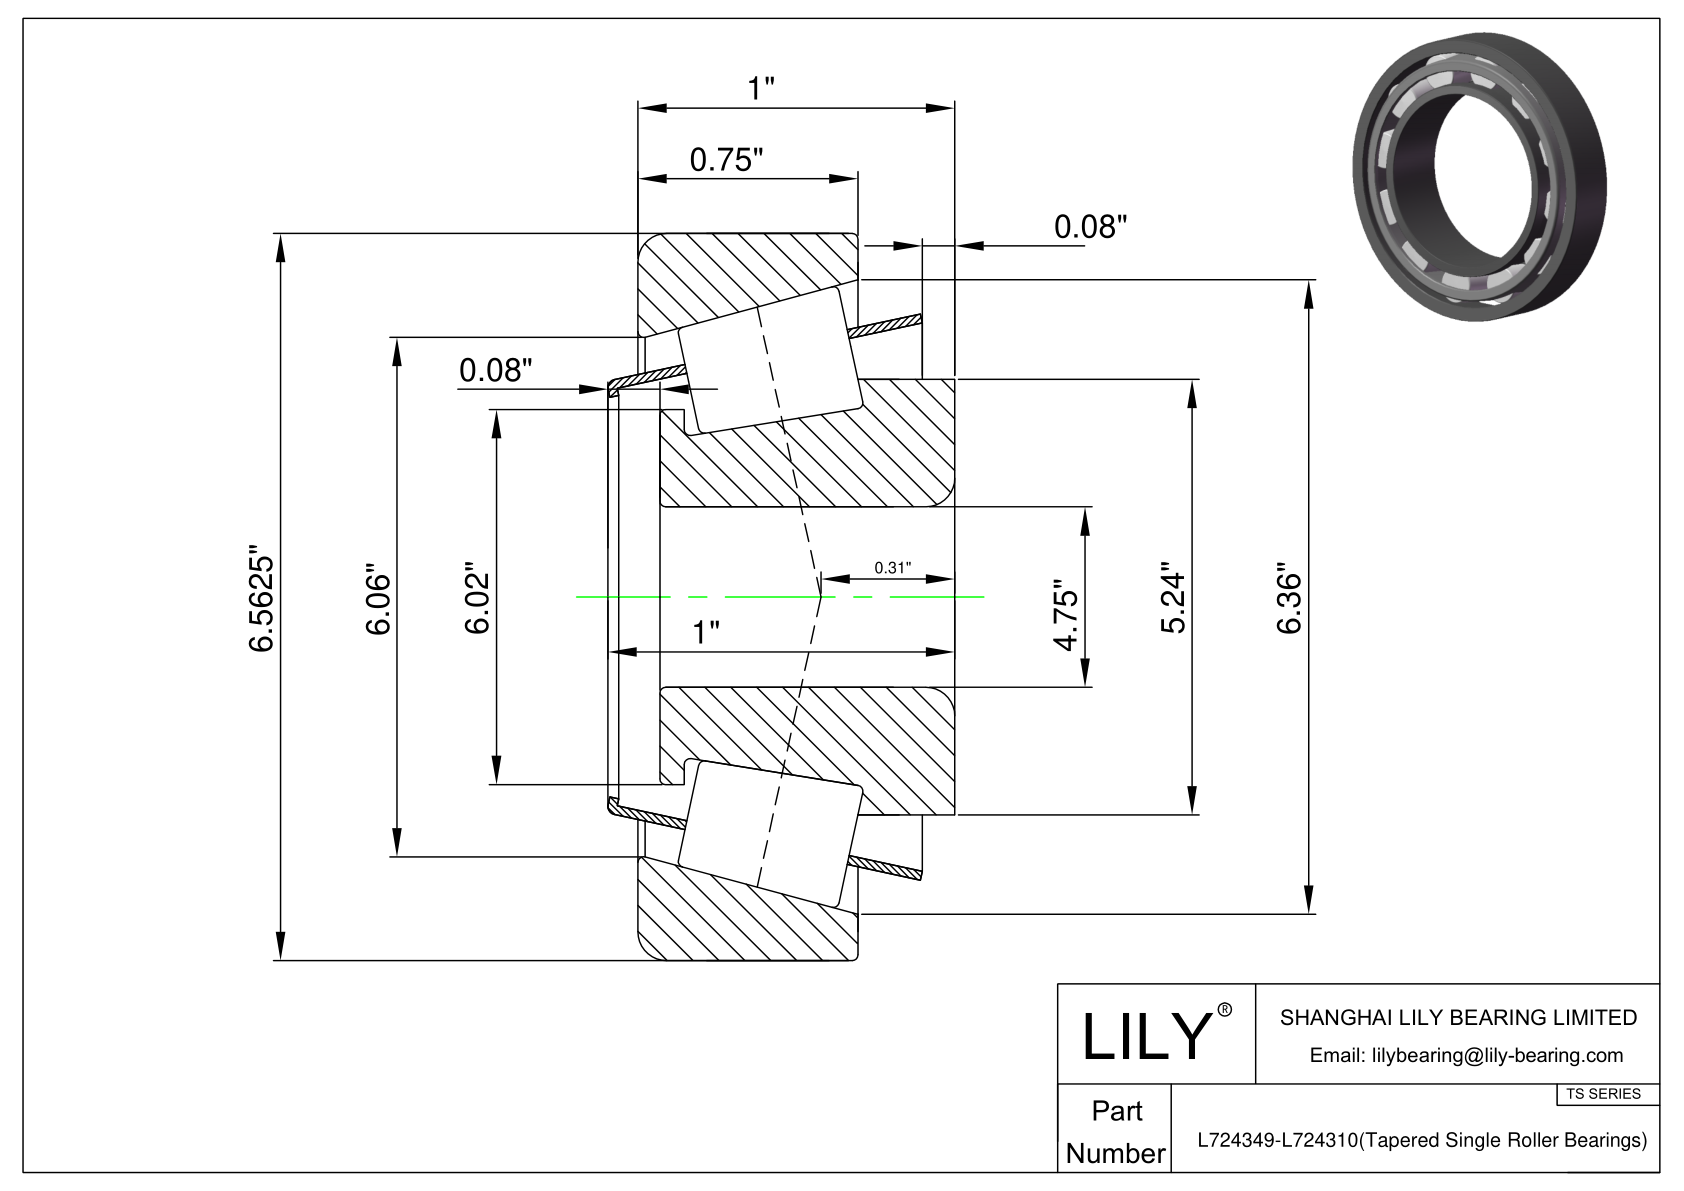 L724349-L724310 TS (Tapered Single Roller Bearings) (Imperial) cad drawing